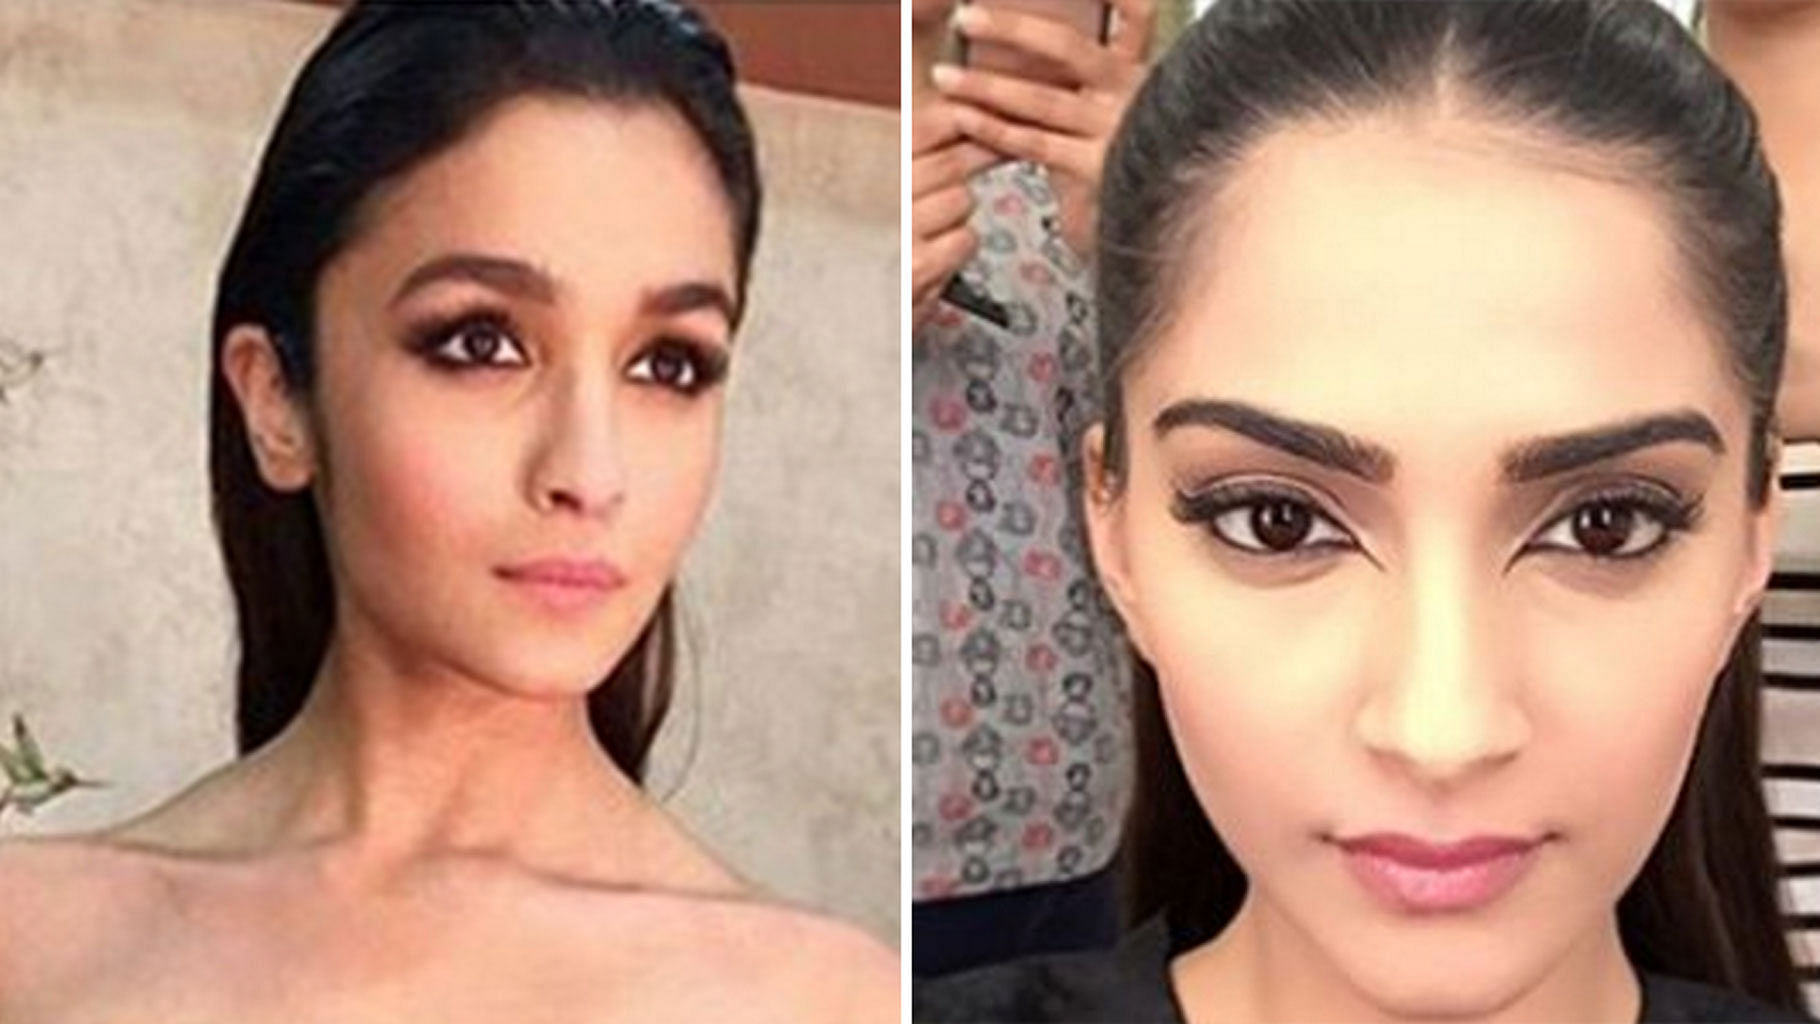 Alia Bhatt and Sonam Kapoor’s expertise with the eyes is something to emulate (Photos: Instagram)